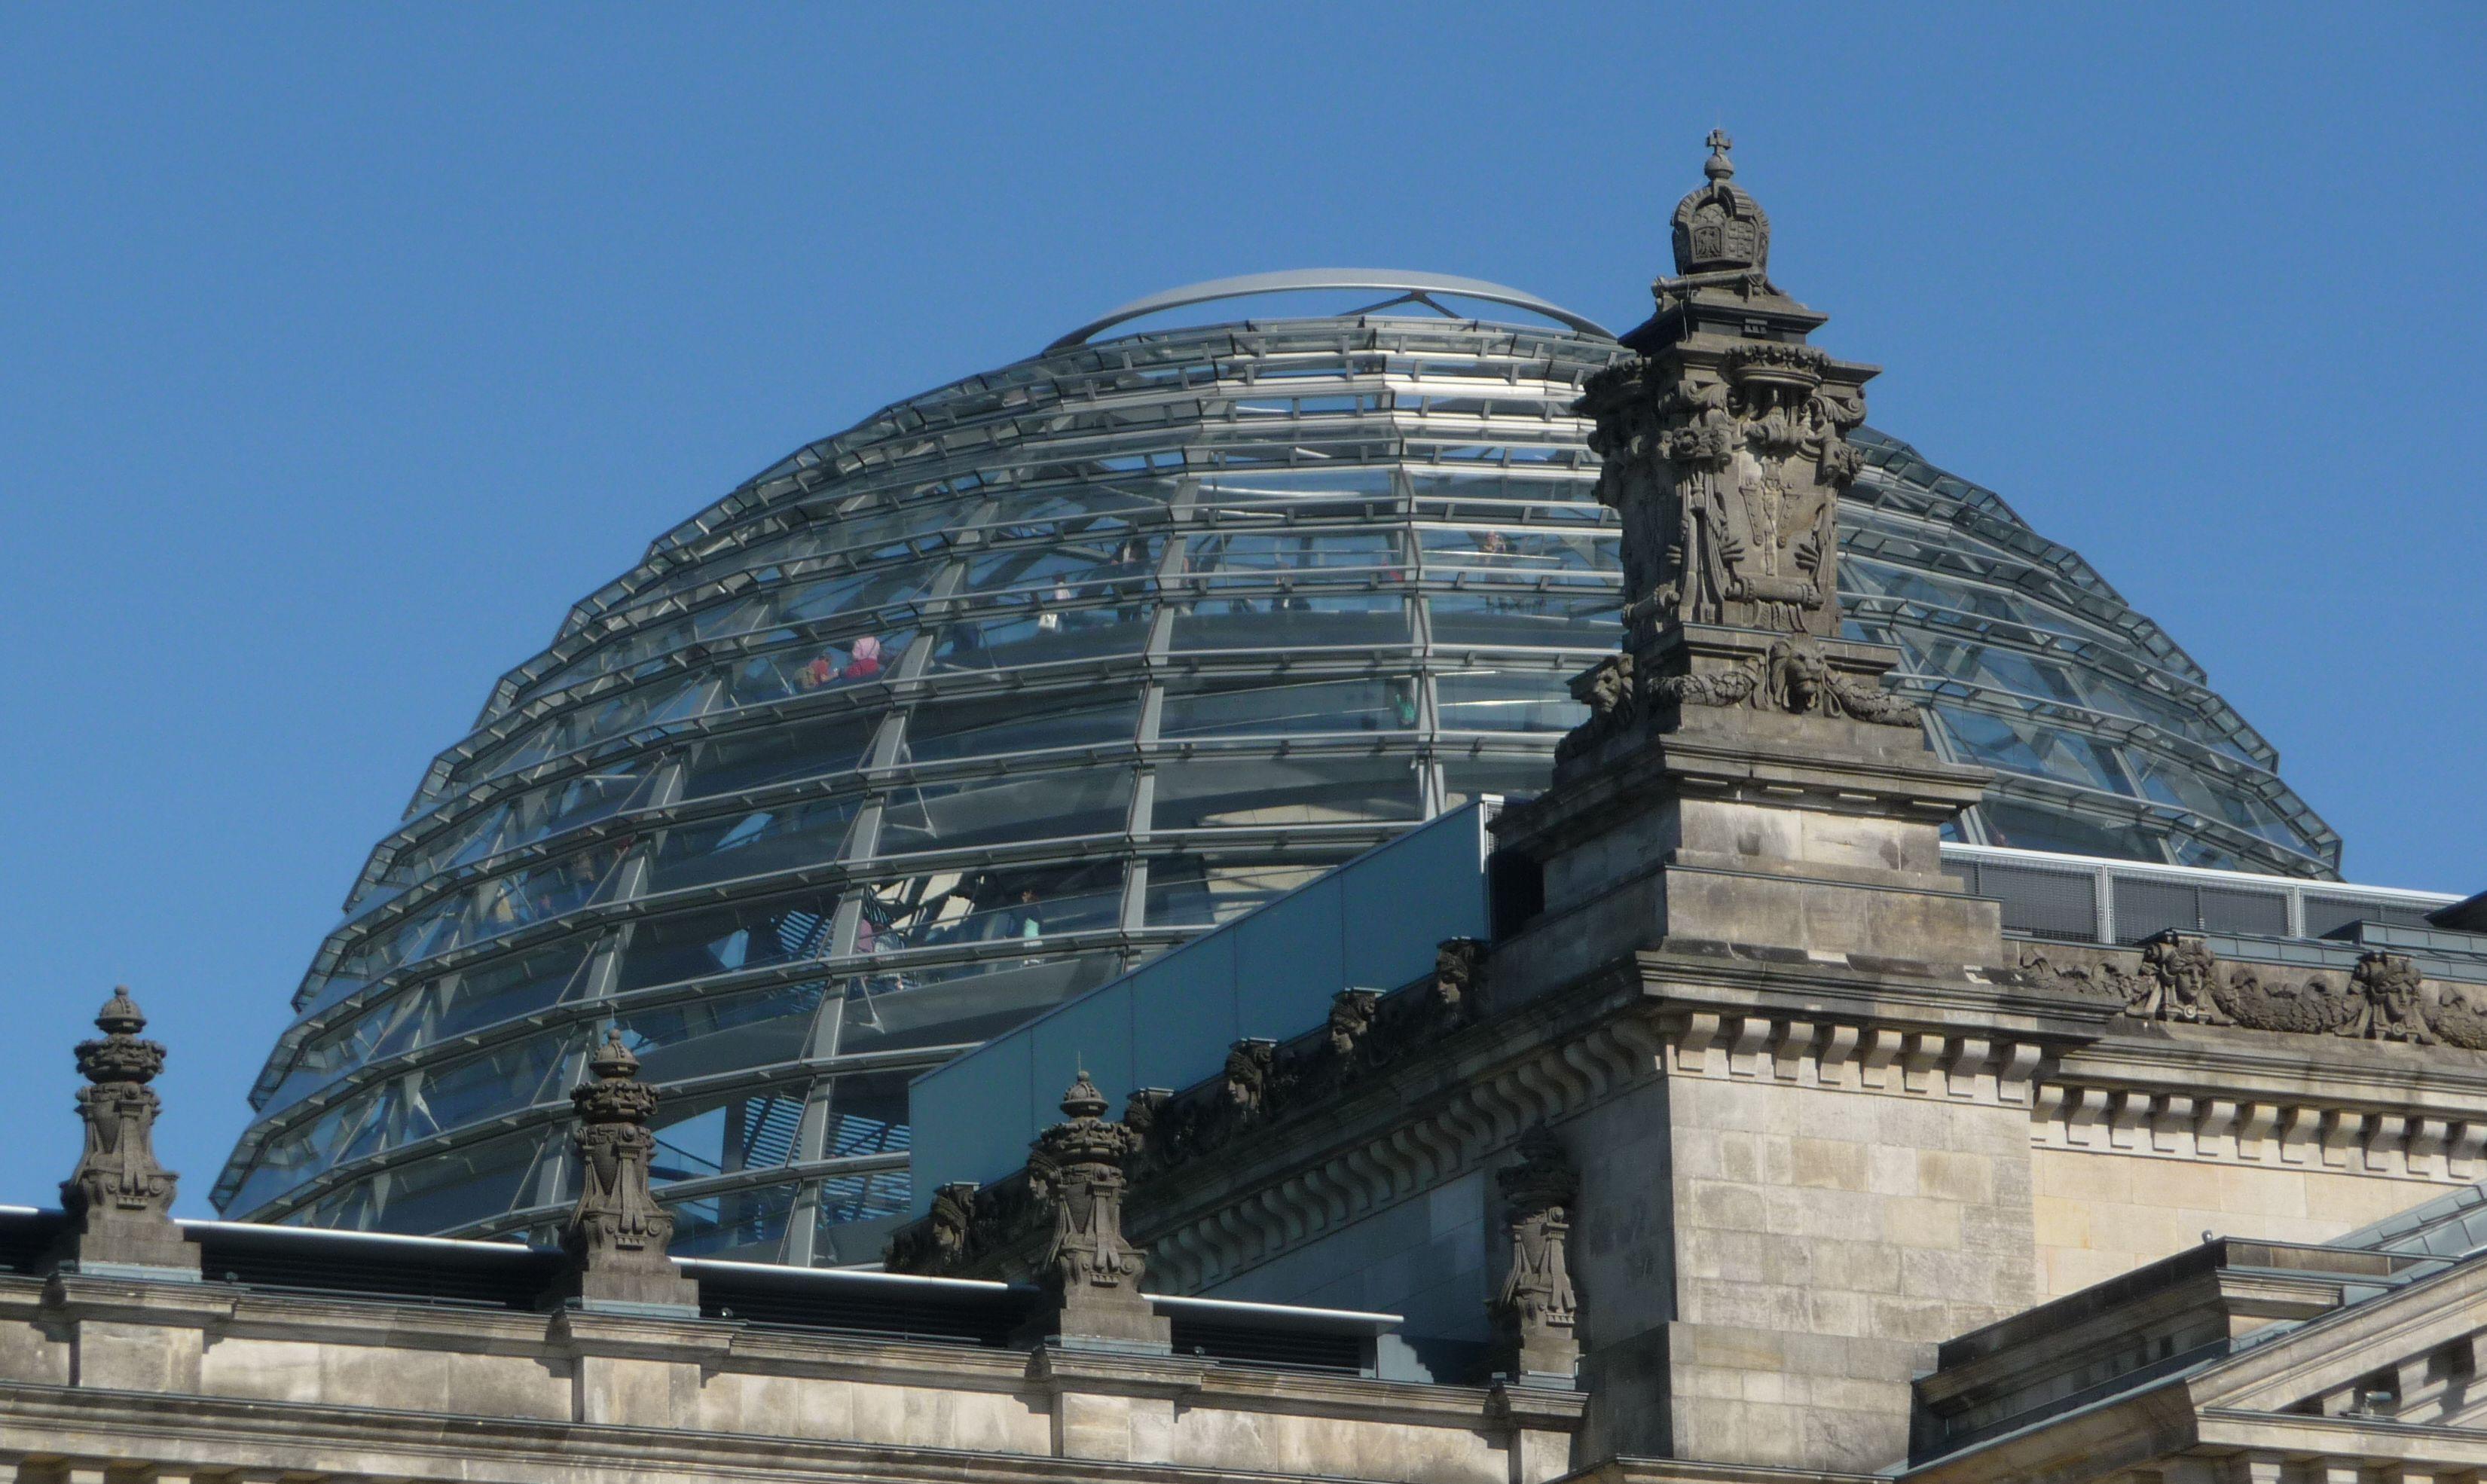 Cover image of this place Reichstag Dome